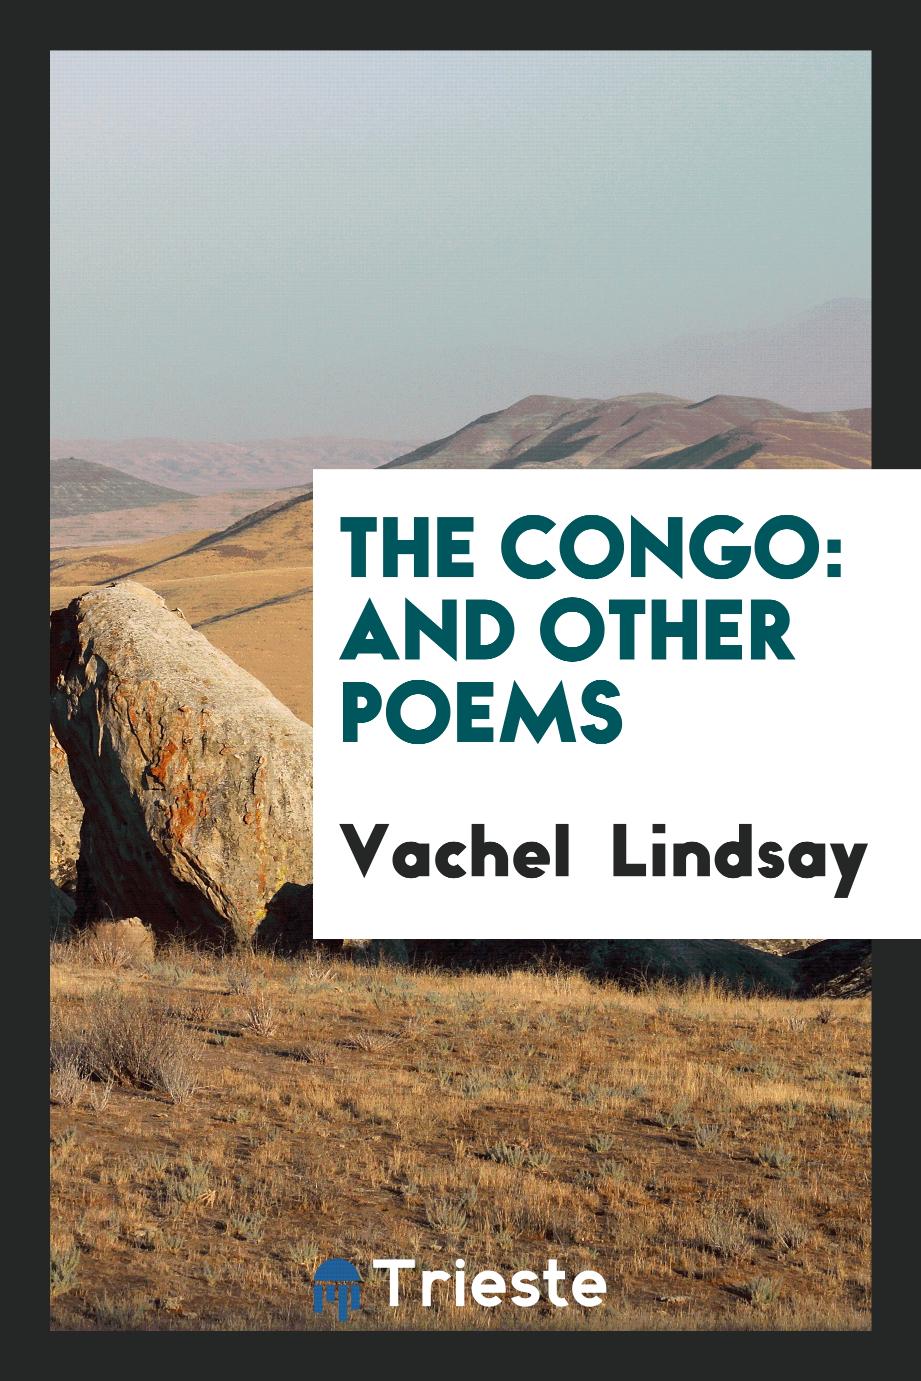 The Congo: And Other Poems